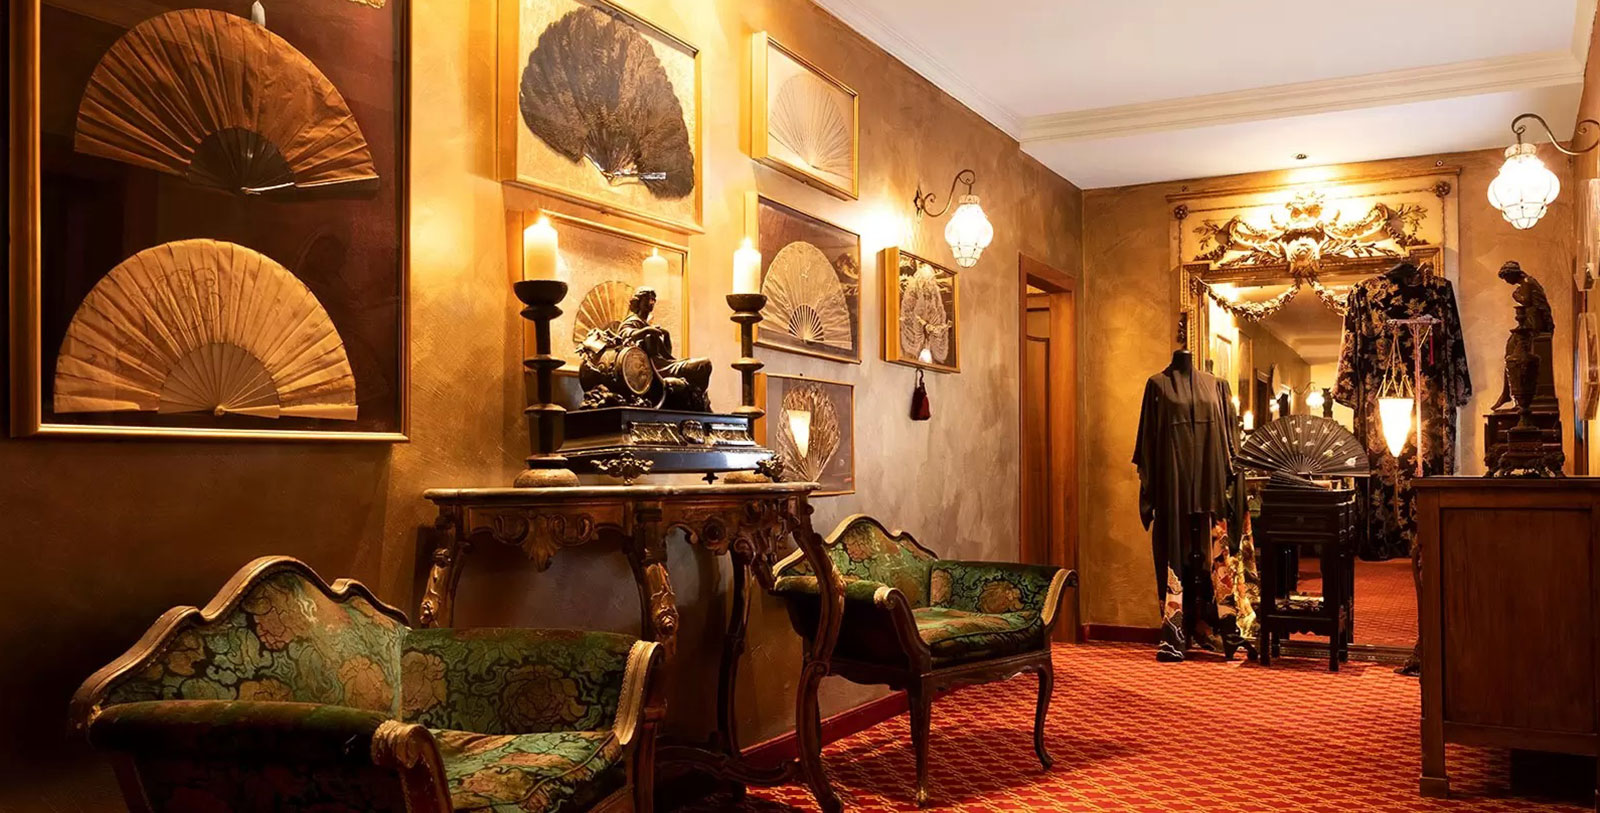 Discover the Wunderkammer antiques, a unique collection belonging to the Beggiato family.